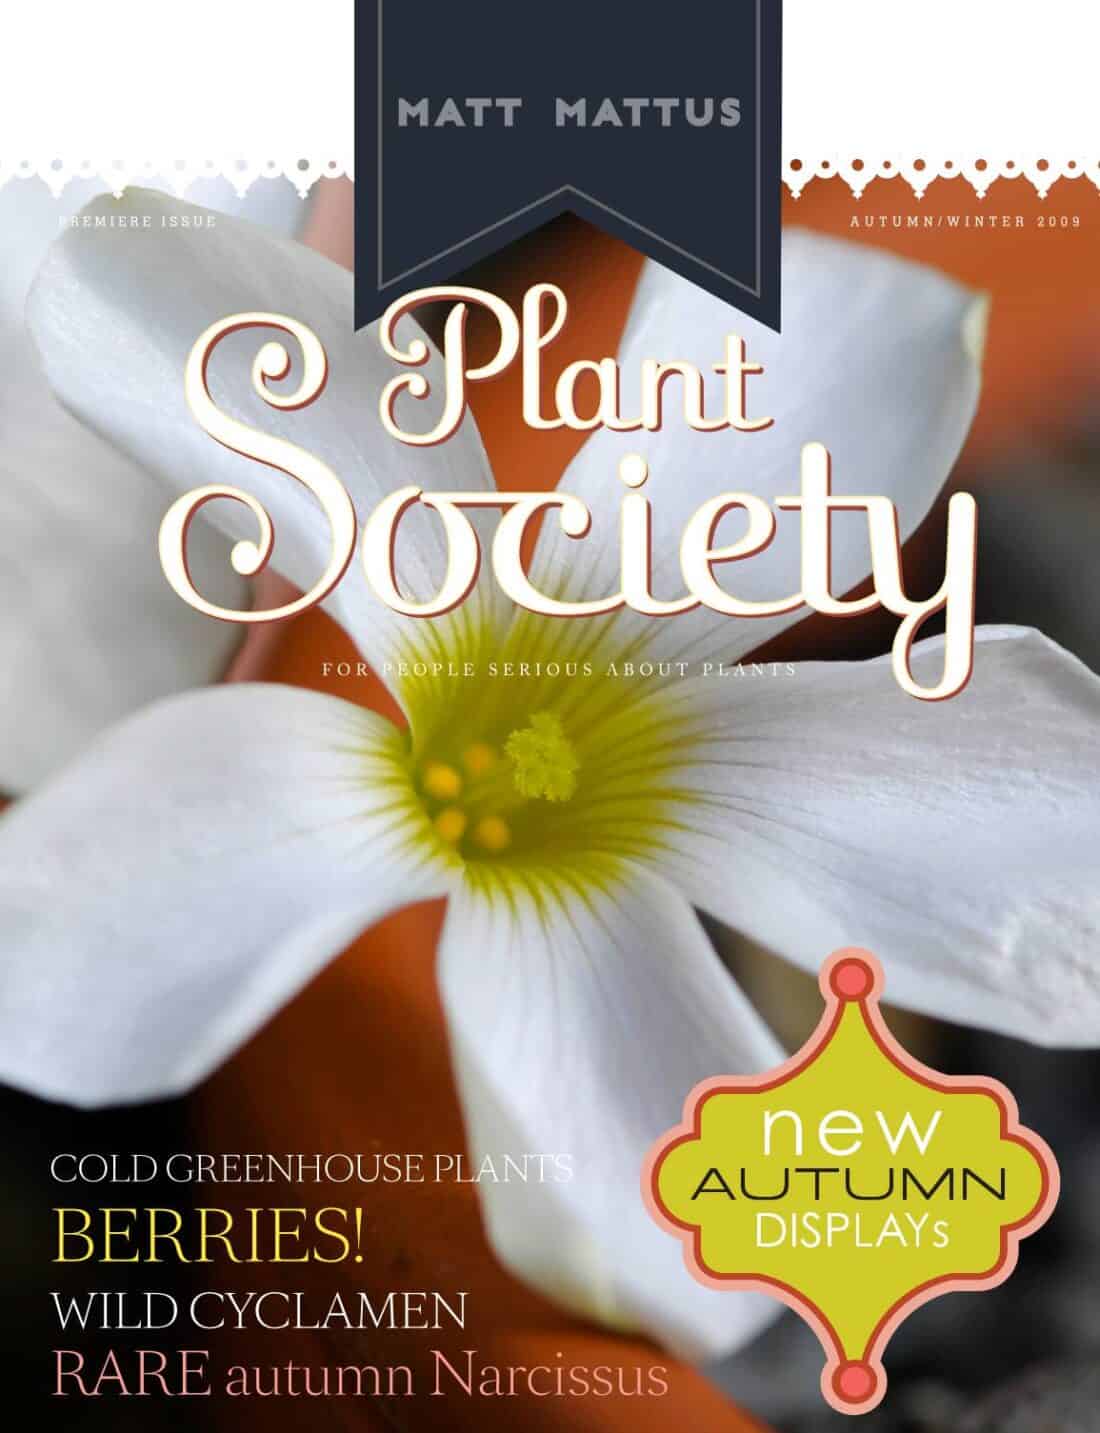 Cover of plant society magazine's autumn/winter 2009 issue featuring a white flower and highlighting content on greenhouse plants, berries, cyclamen, and autumn narcissus.